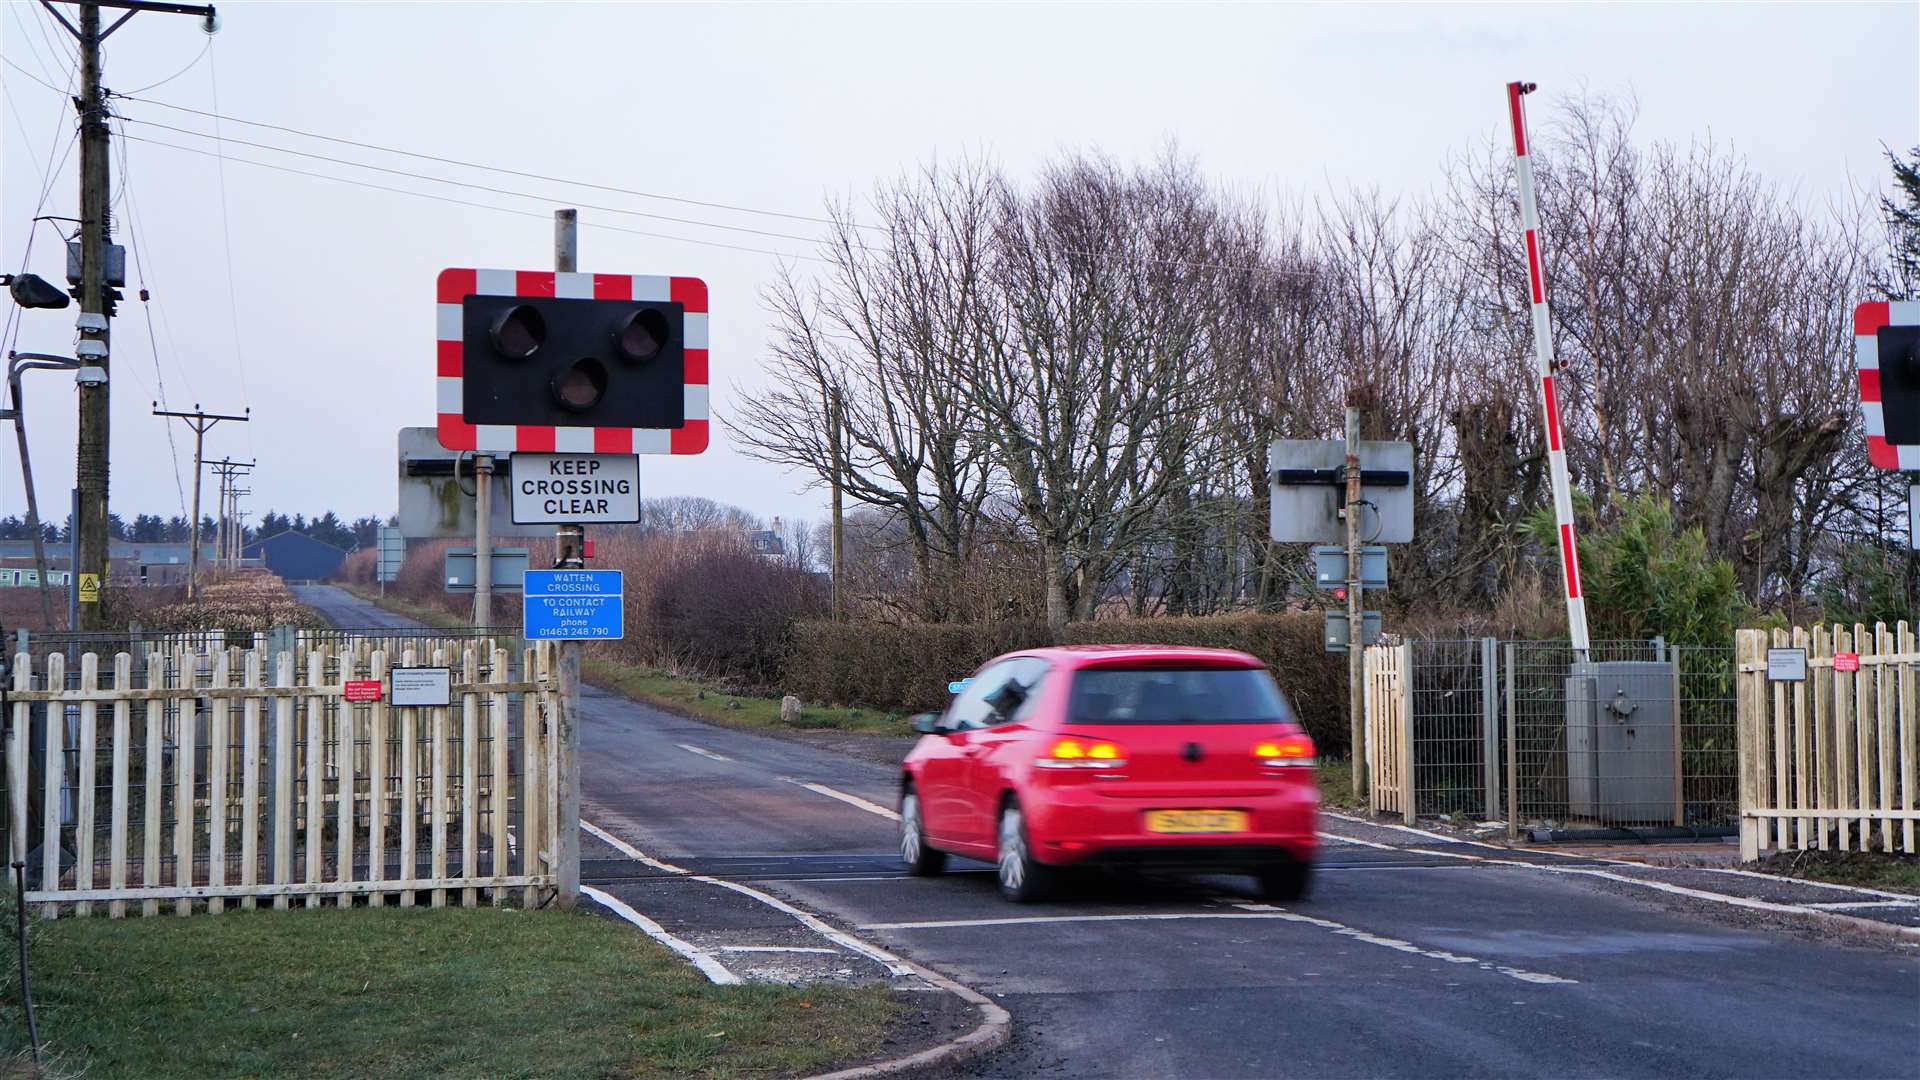 Vehicles were able to go through the Watten level crossing but when trains were due a special vehicle was present to stop access. Picture: DGS